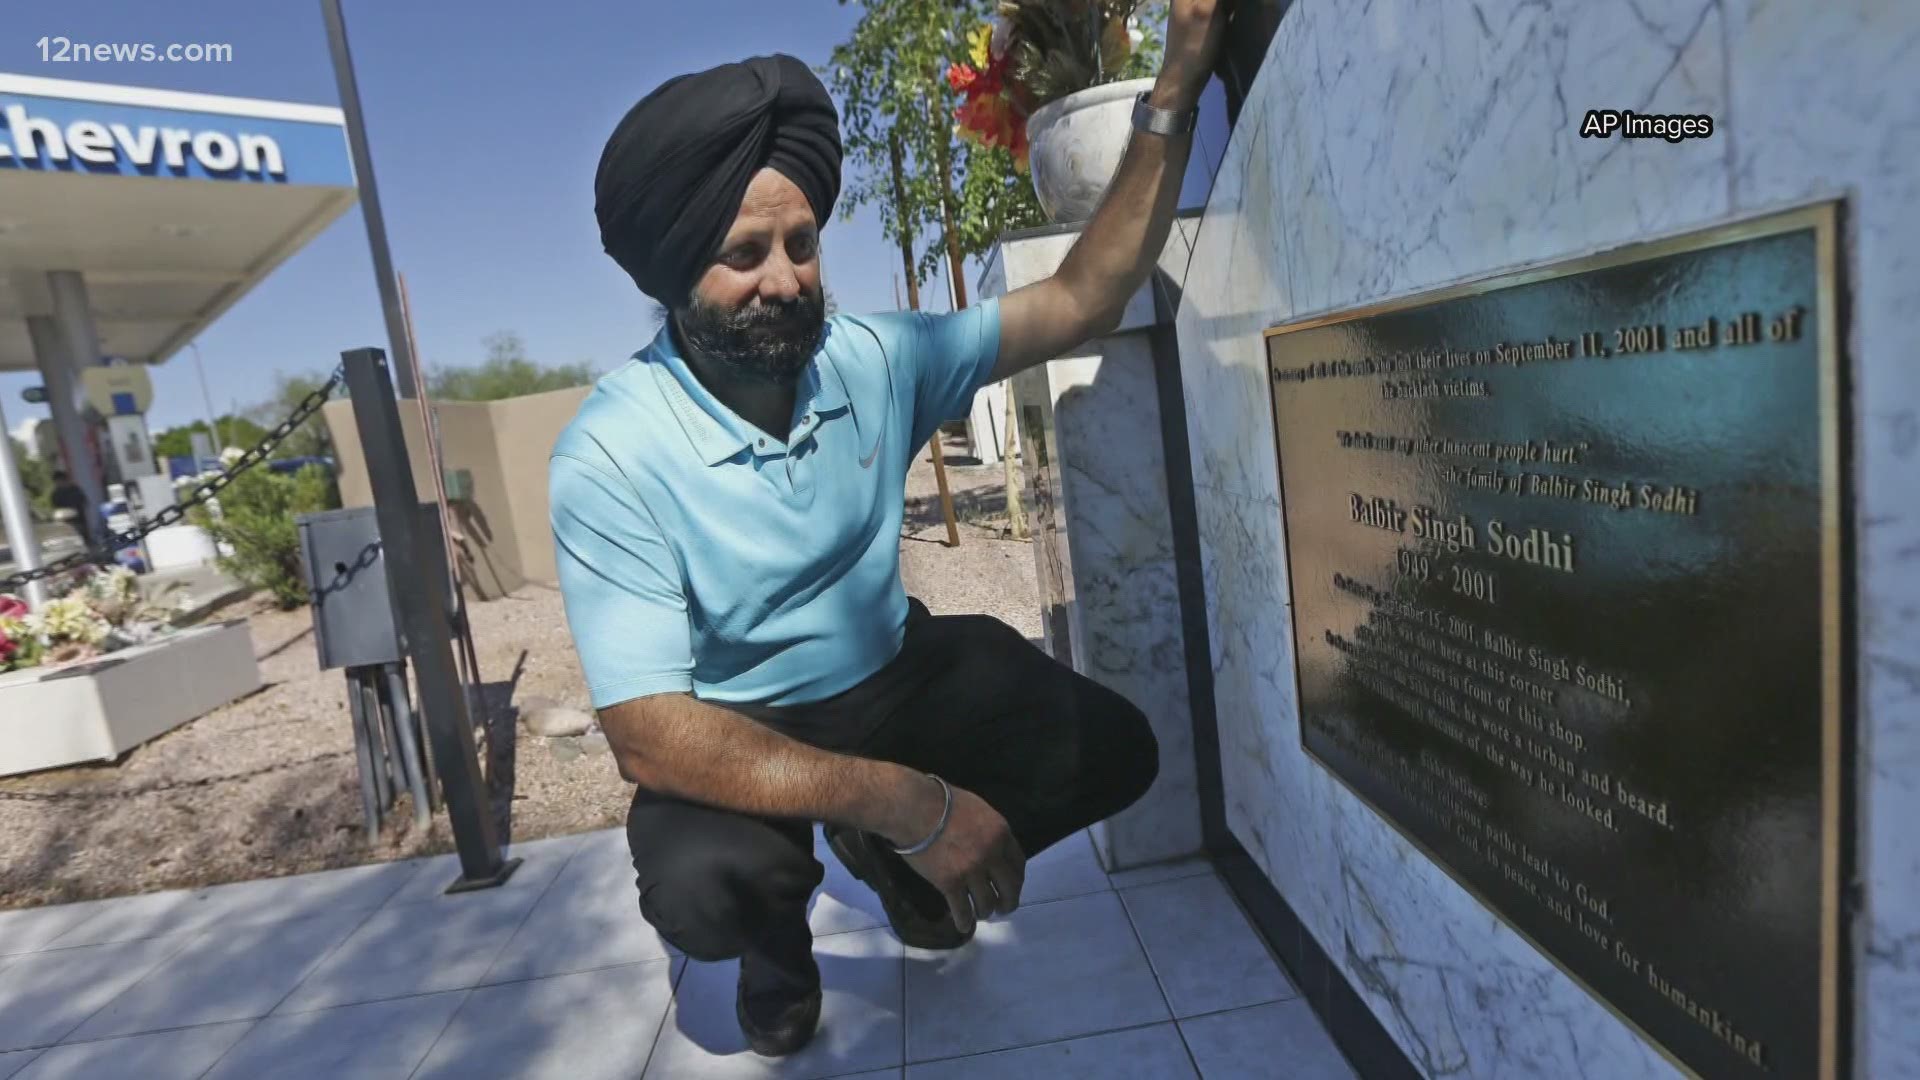 19 years ago Balbir Singh Sodi, a man of the Sikh faith, was gunned down by a man trying to retaliate for 9/11. His family is dedicating themselves to peace in 2020.